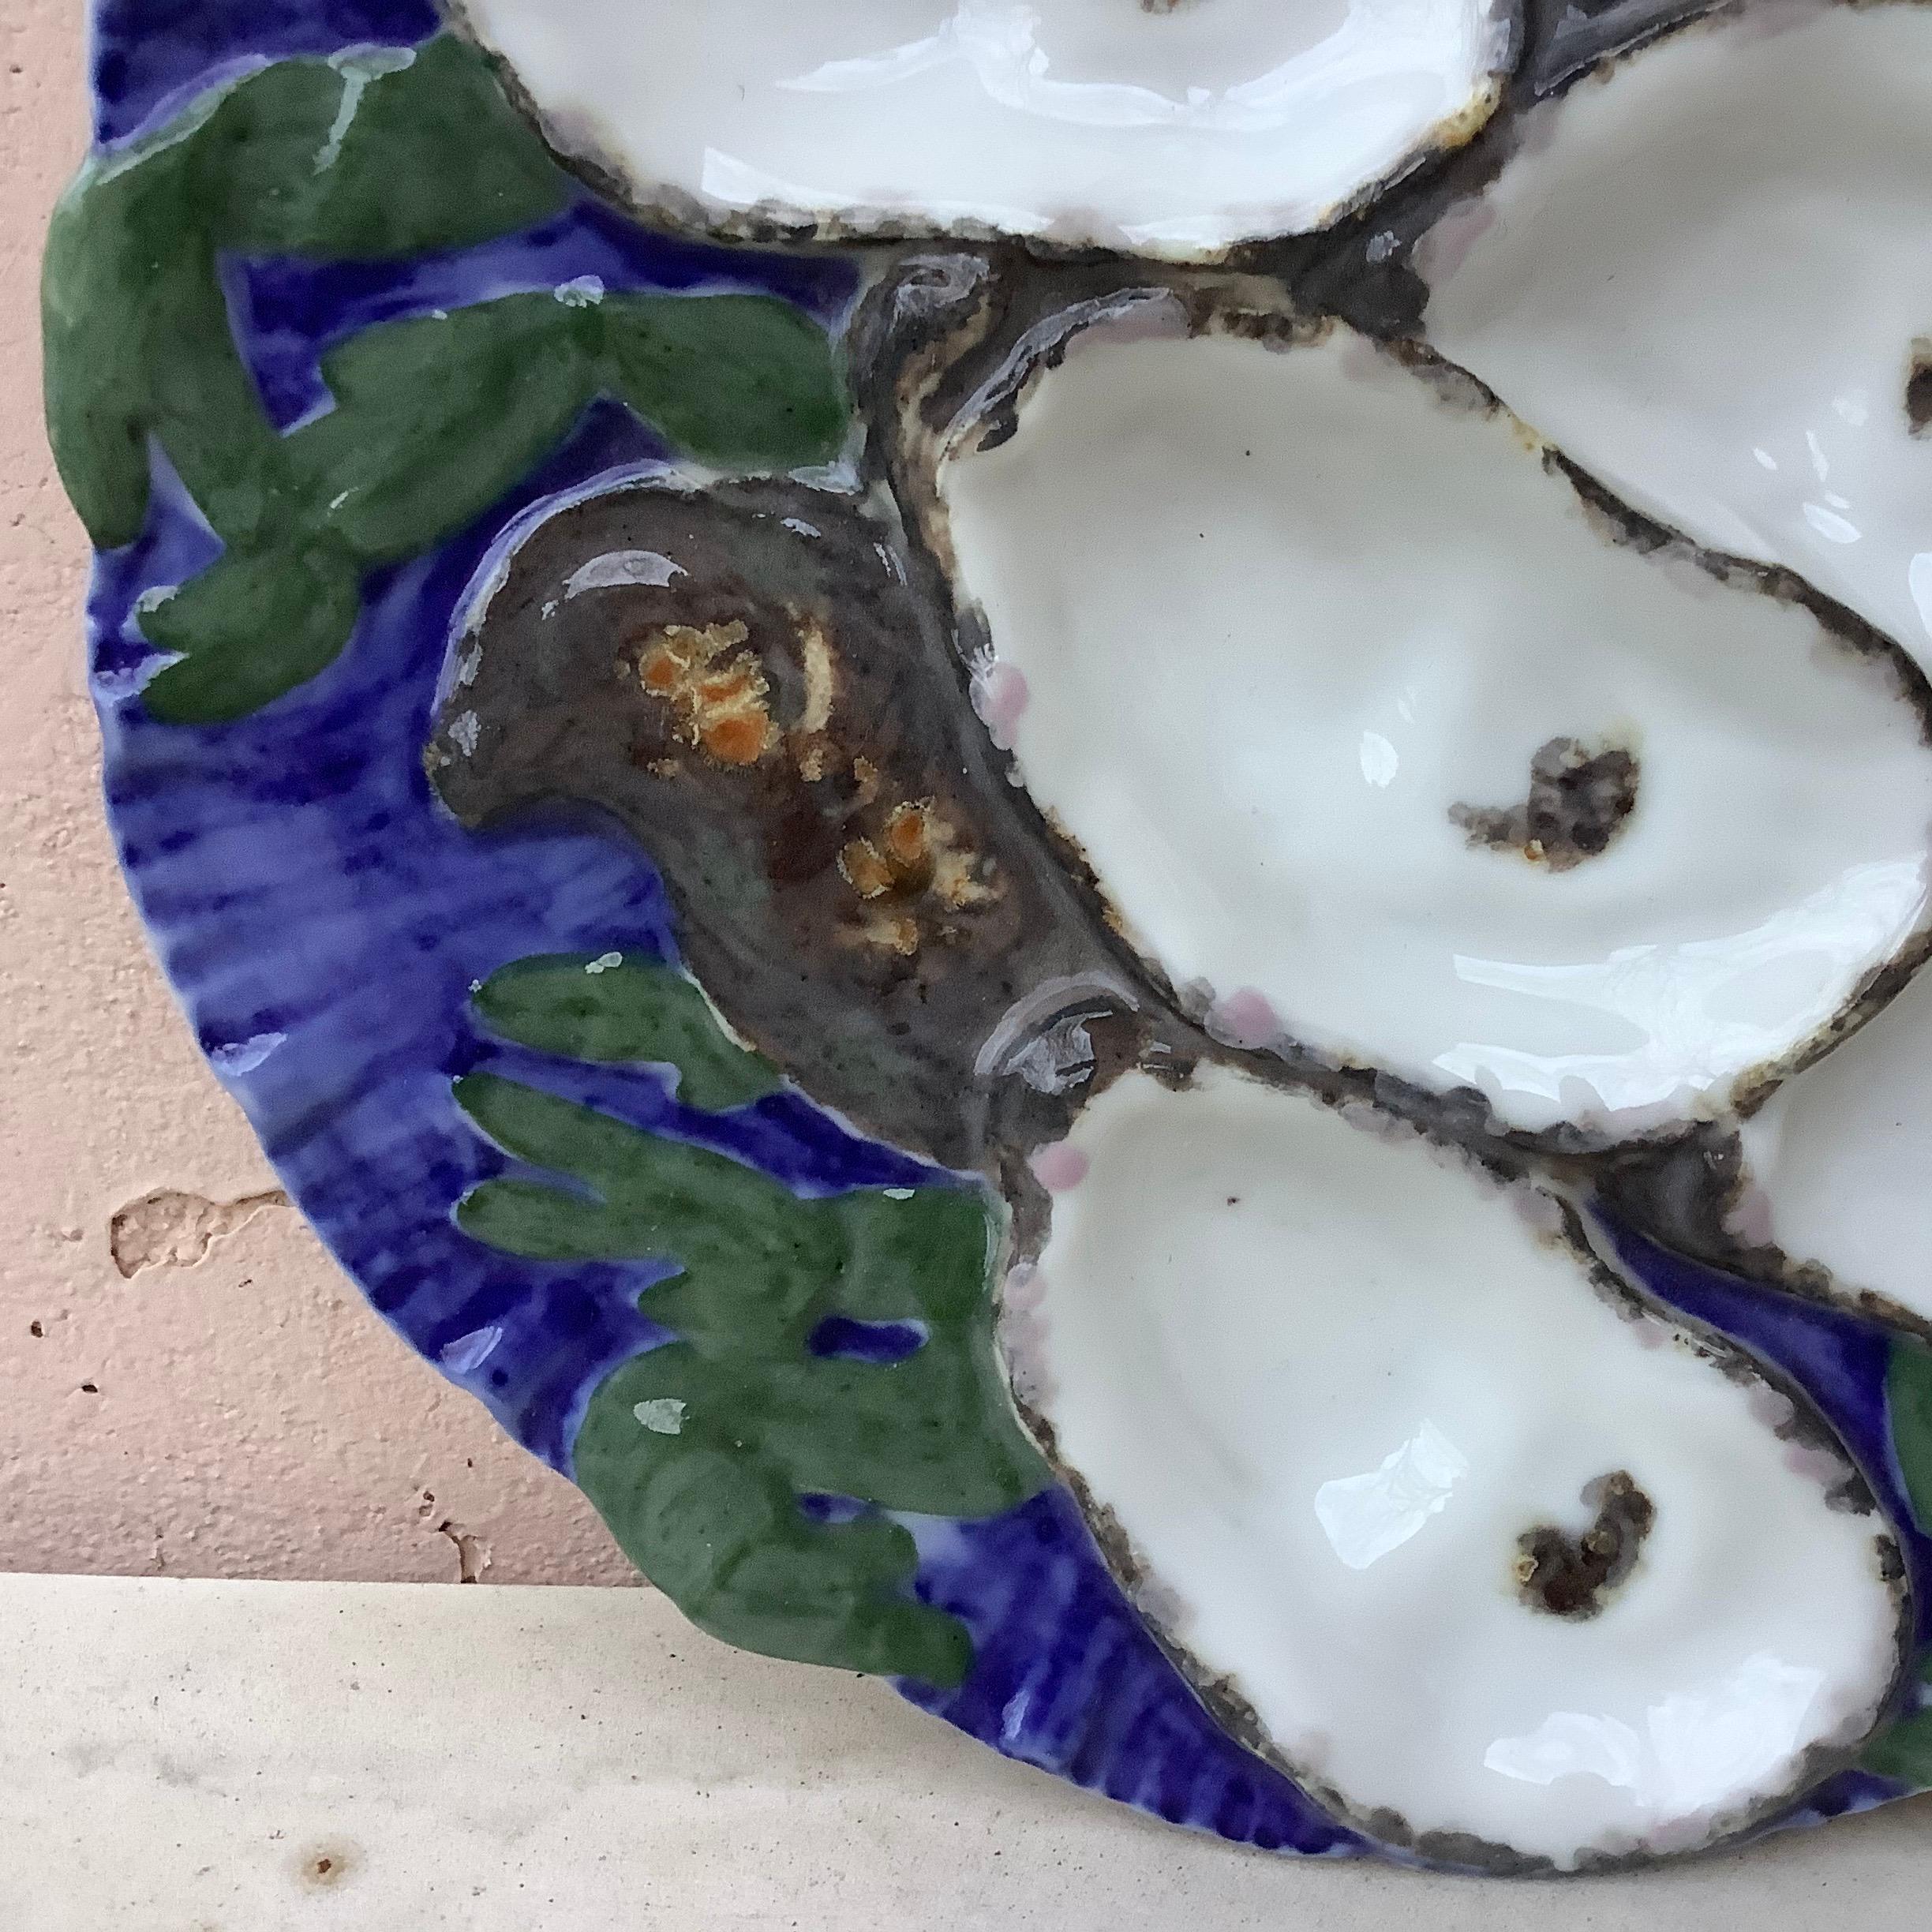 Antique 19th century French porcelain oyster plate with the turkey pattern signed Limoges Haviland.